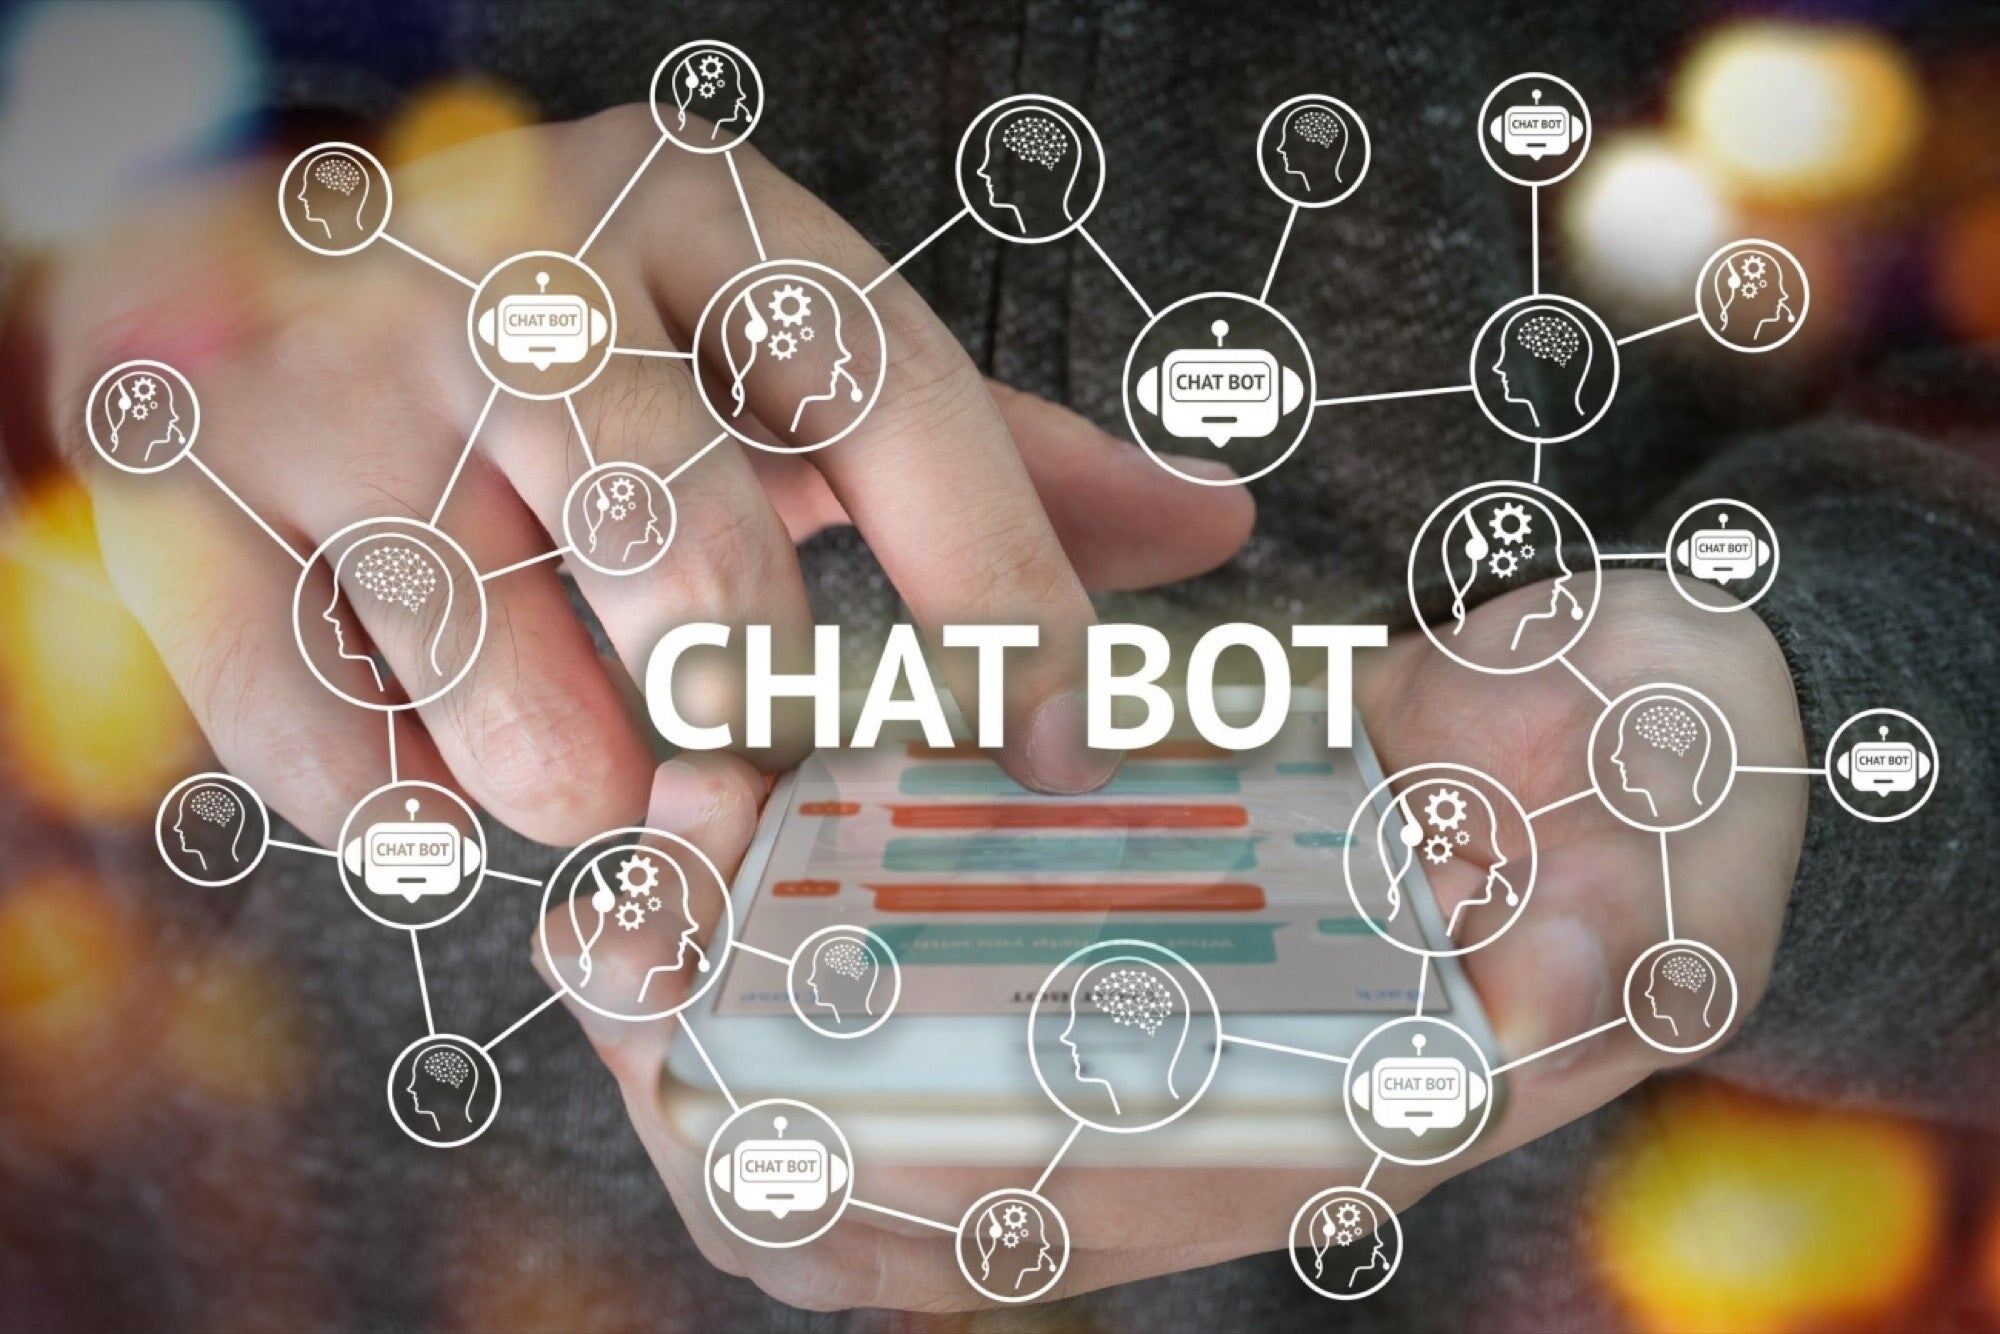 How To Make Chatbots With Personality